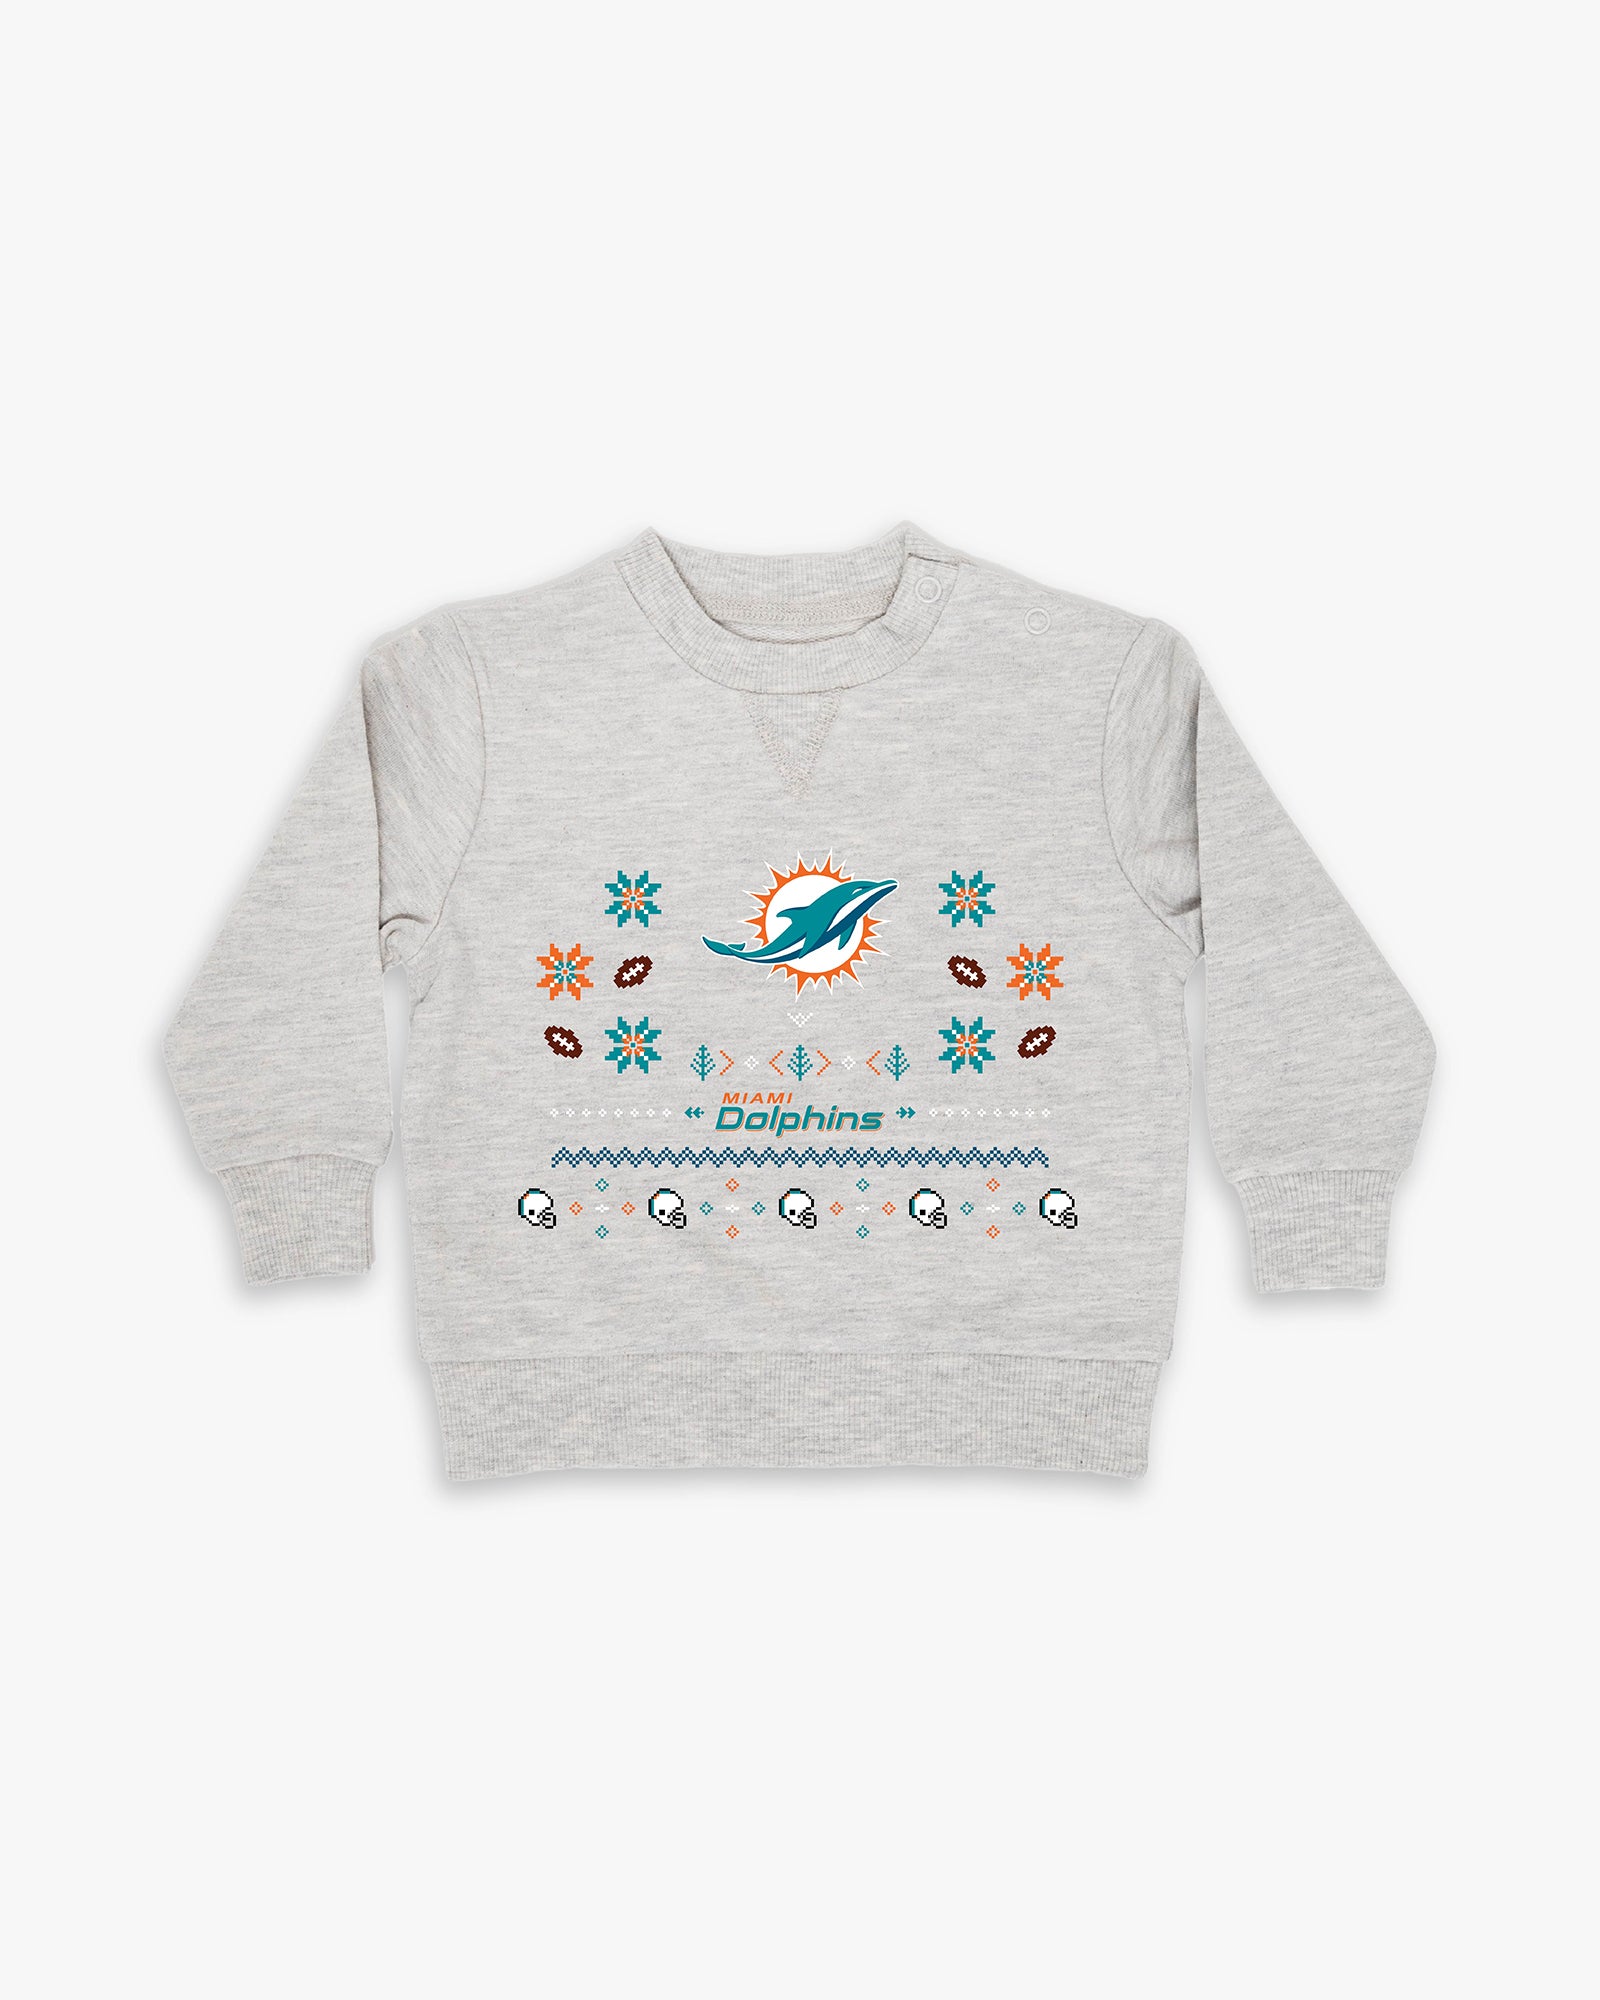 Gertex NFL Baby Ugly Holiday Sweater